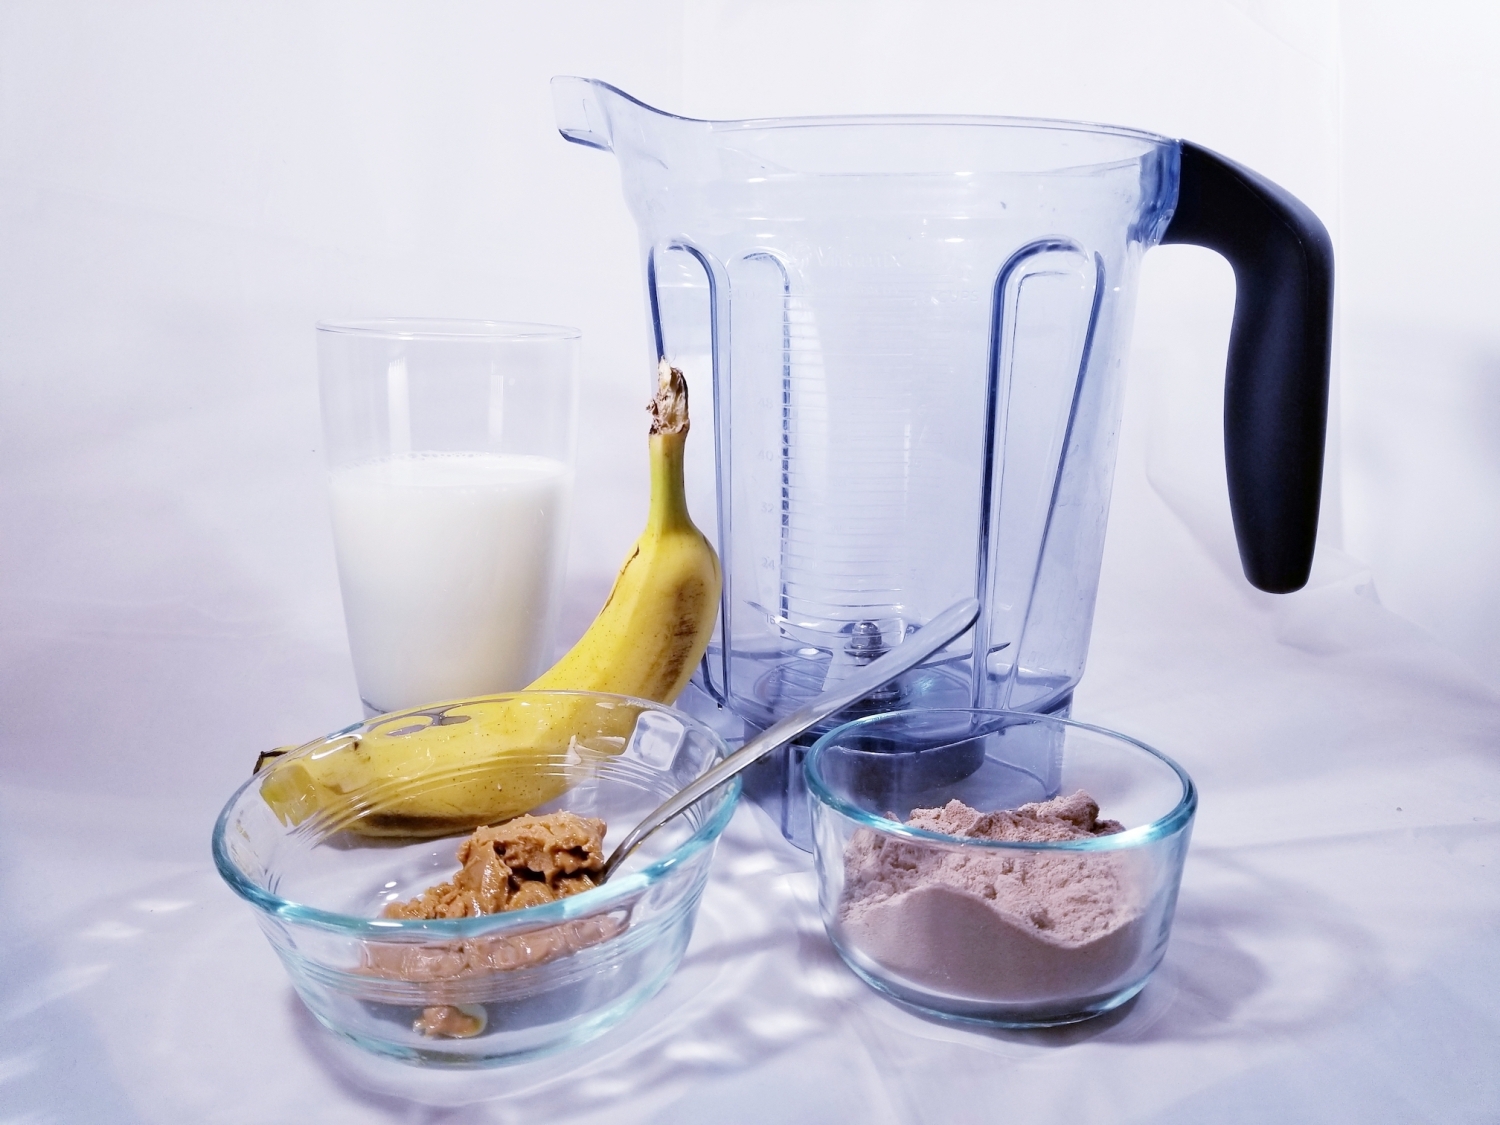 picture of the ingredients used in this recipe. Milk, a banana, peanut butter, protein powder, and the blender container.